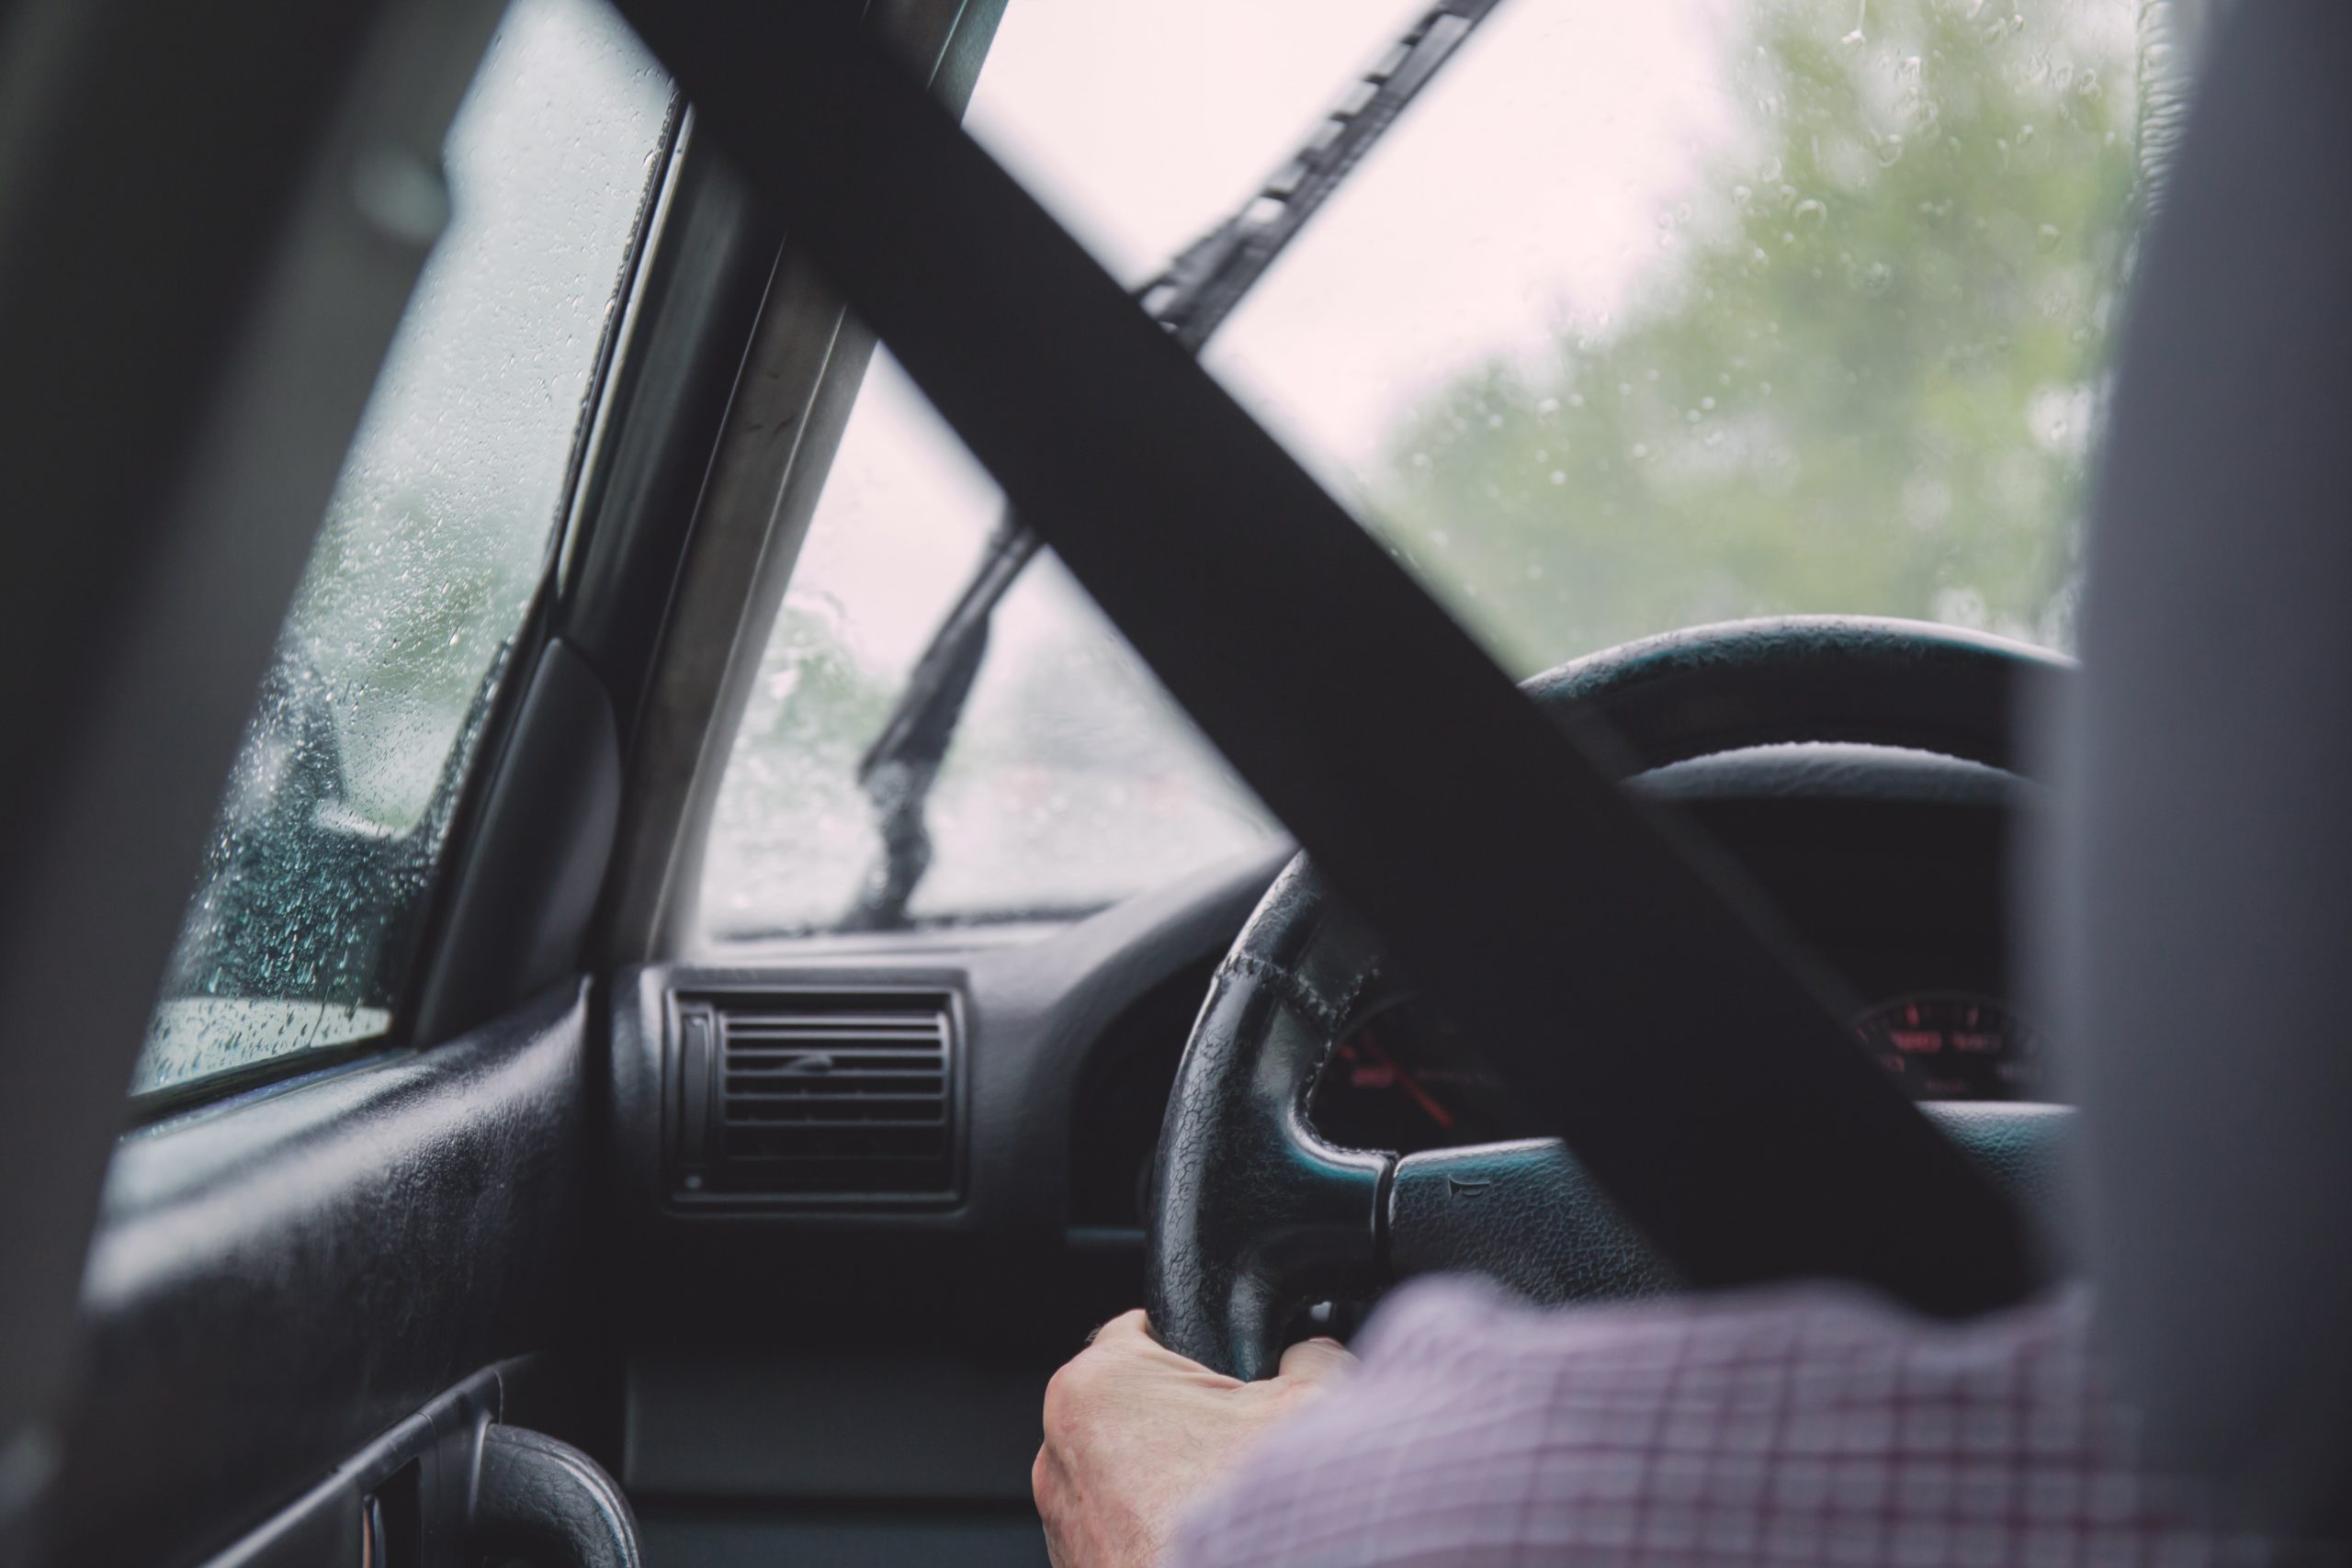 Driver's hands on the steering wheel of a car, with a seatbelt fastened across their chest. The car's windshield wipers are in motion, clearing rainwater from the windshield on a wet day. The view is from the inside of the car, focusing on the driver and windshield.